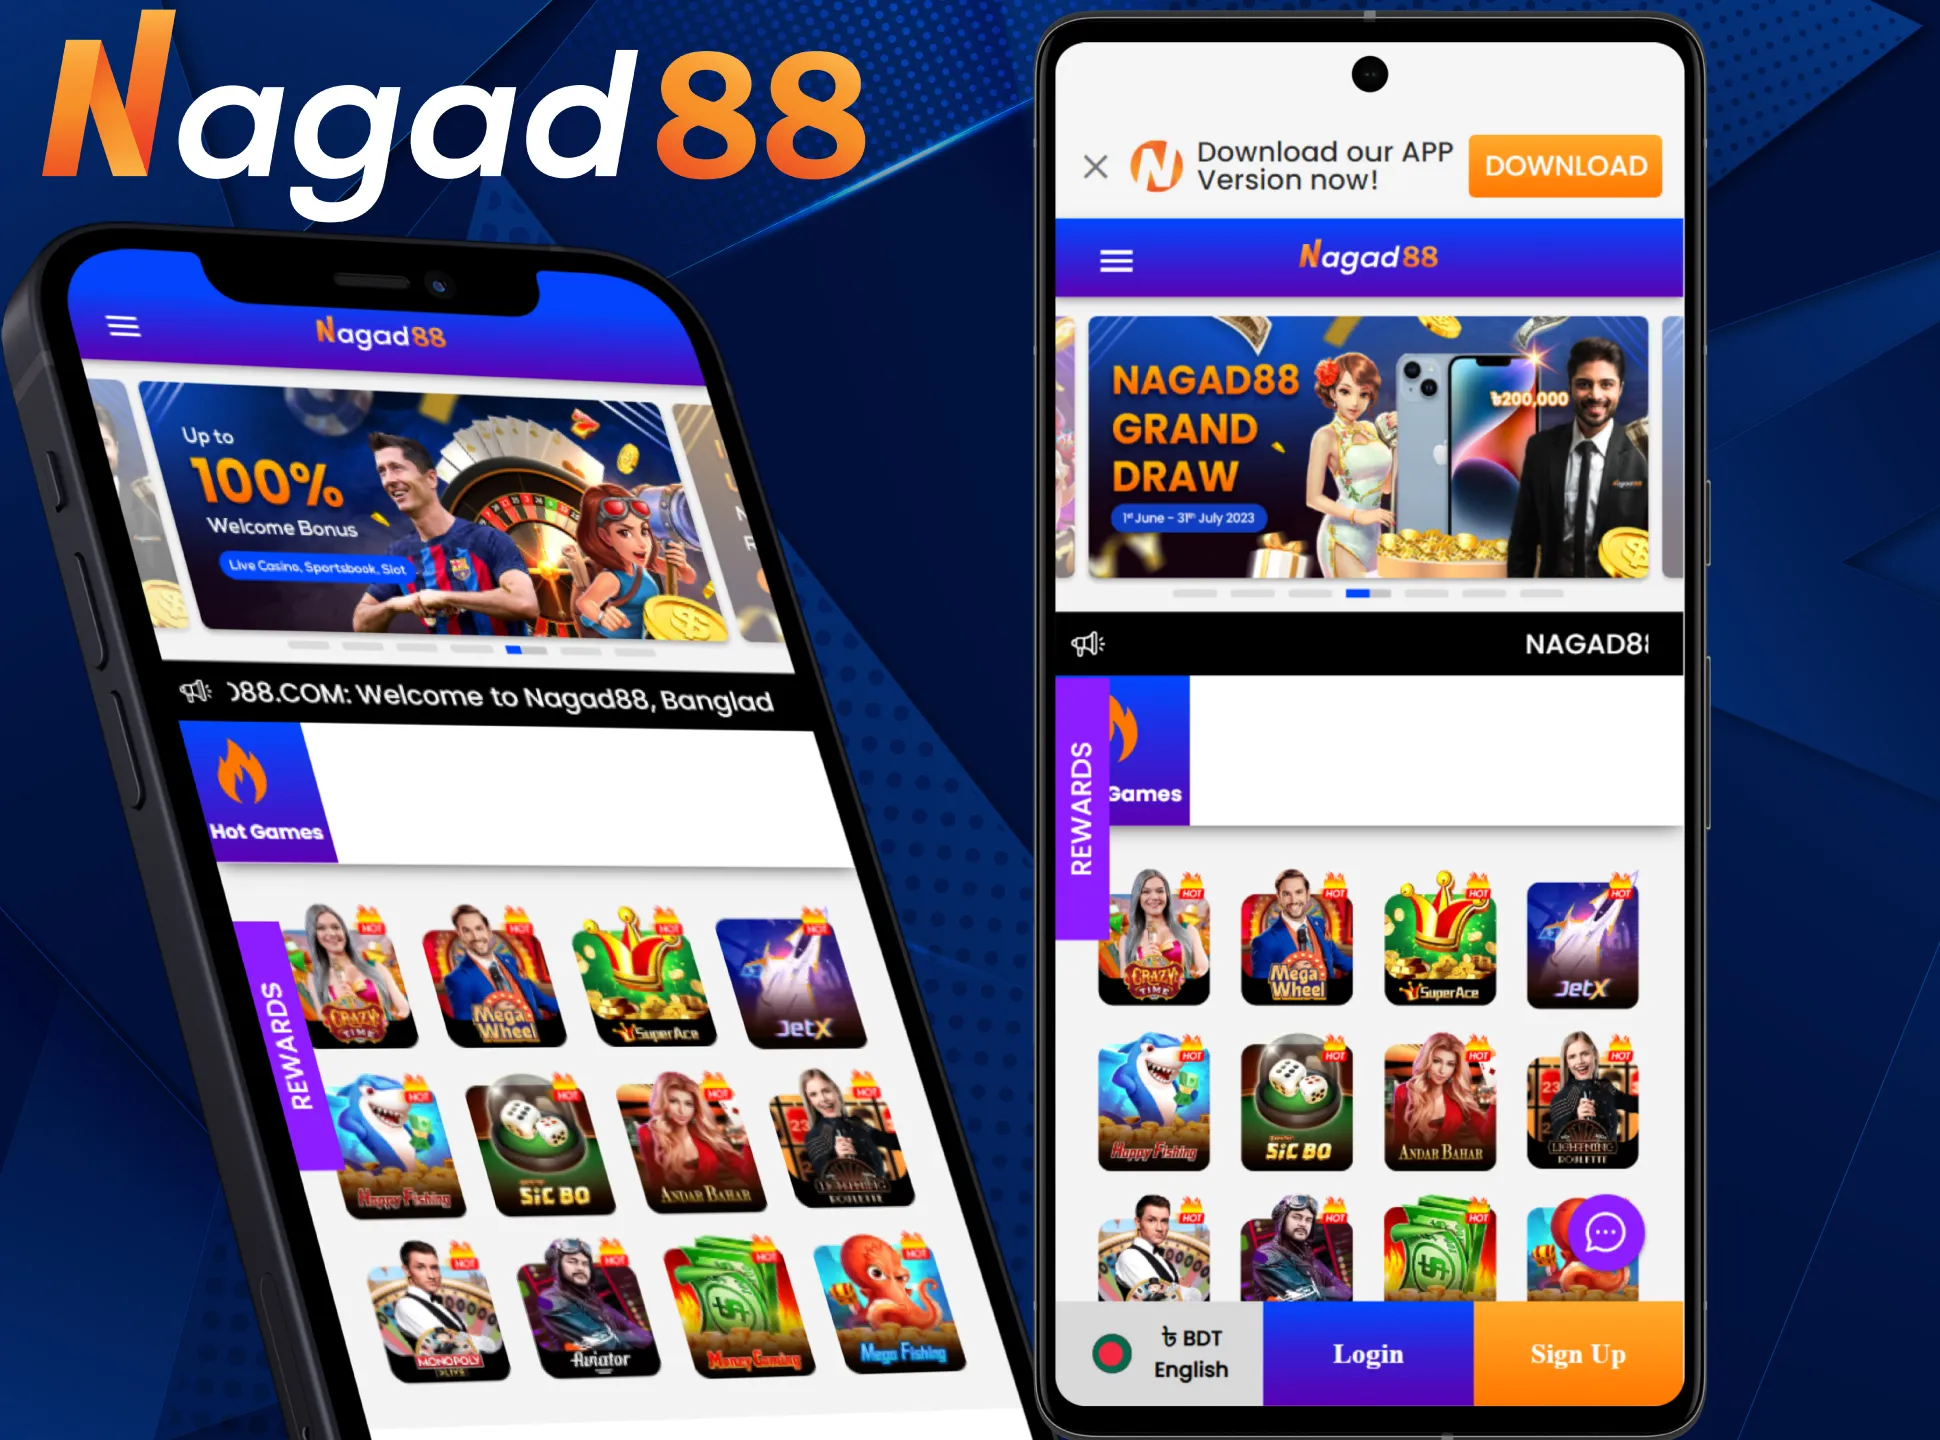 Nagad88 has a very handy app for your phone for betting and casino games.